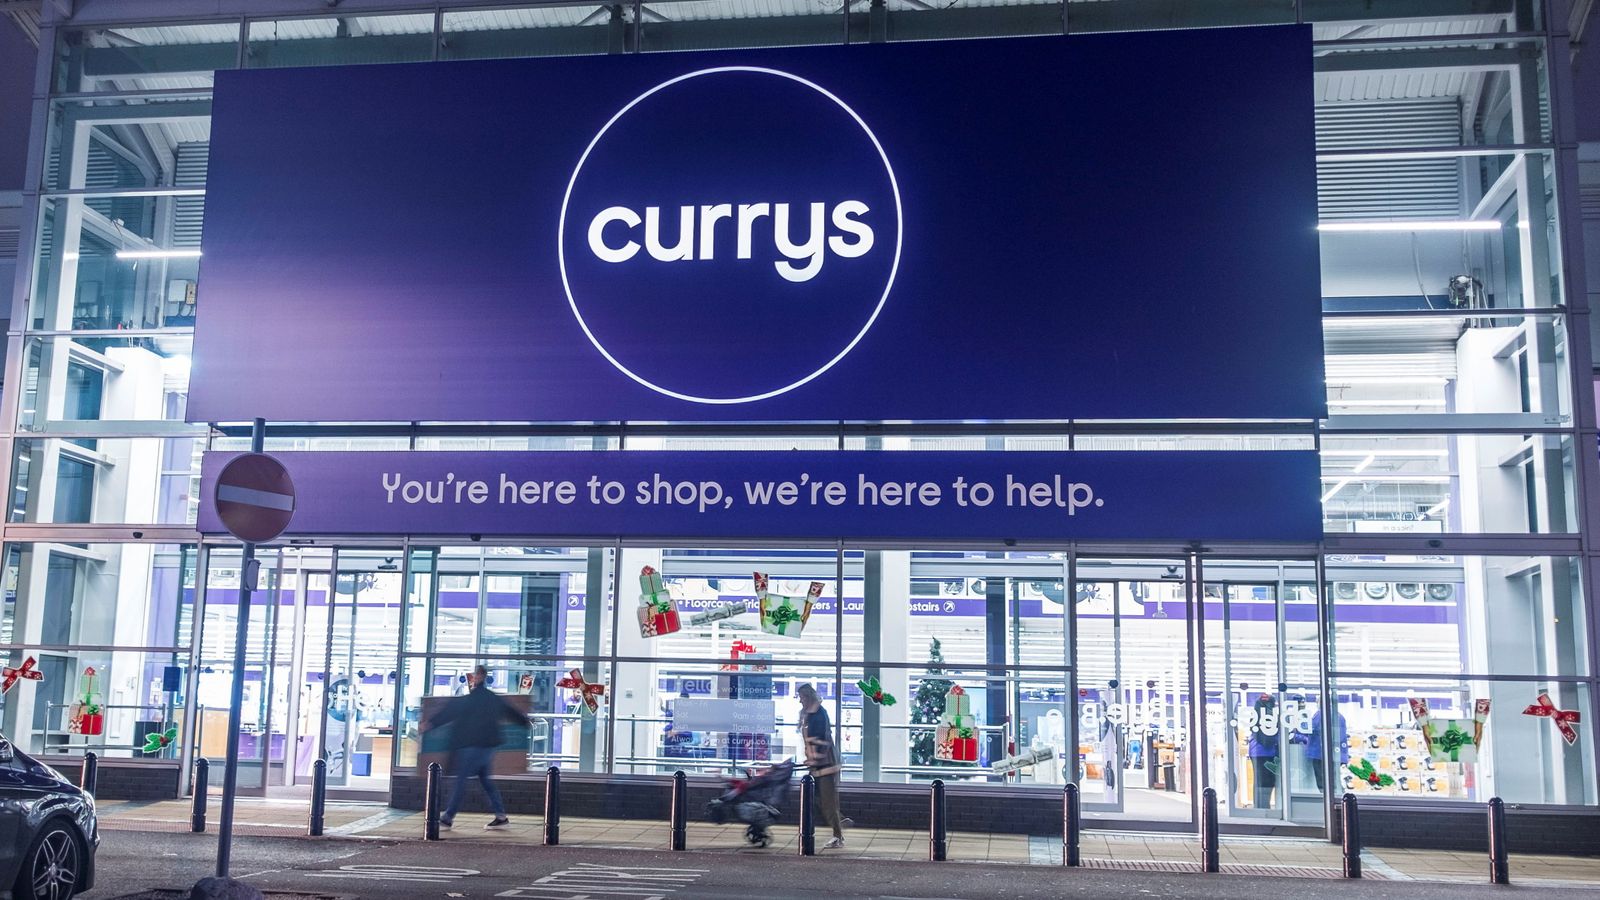 Top shareholder wants £800m for electricals retailer Currys